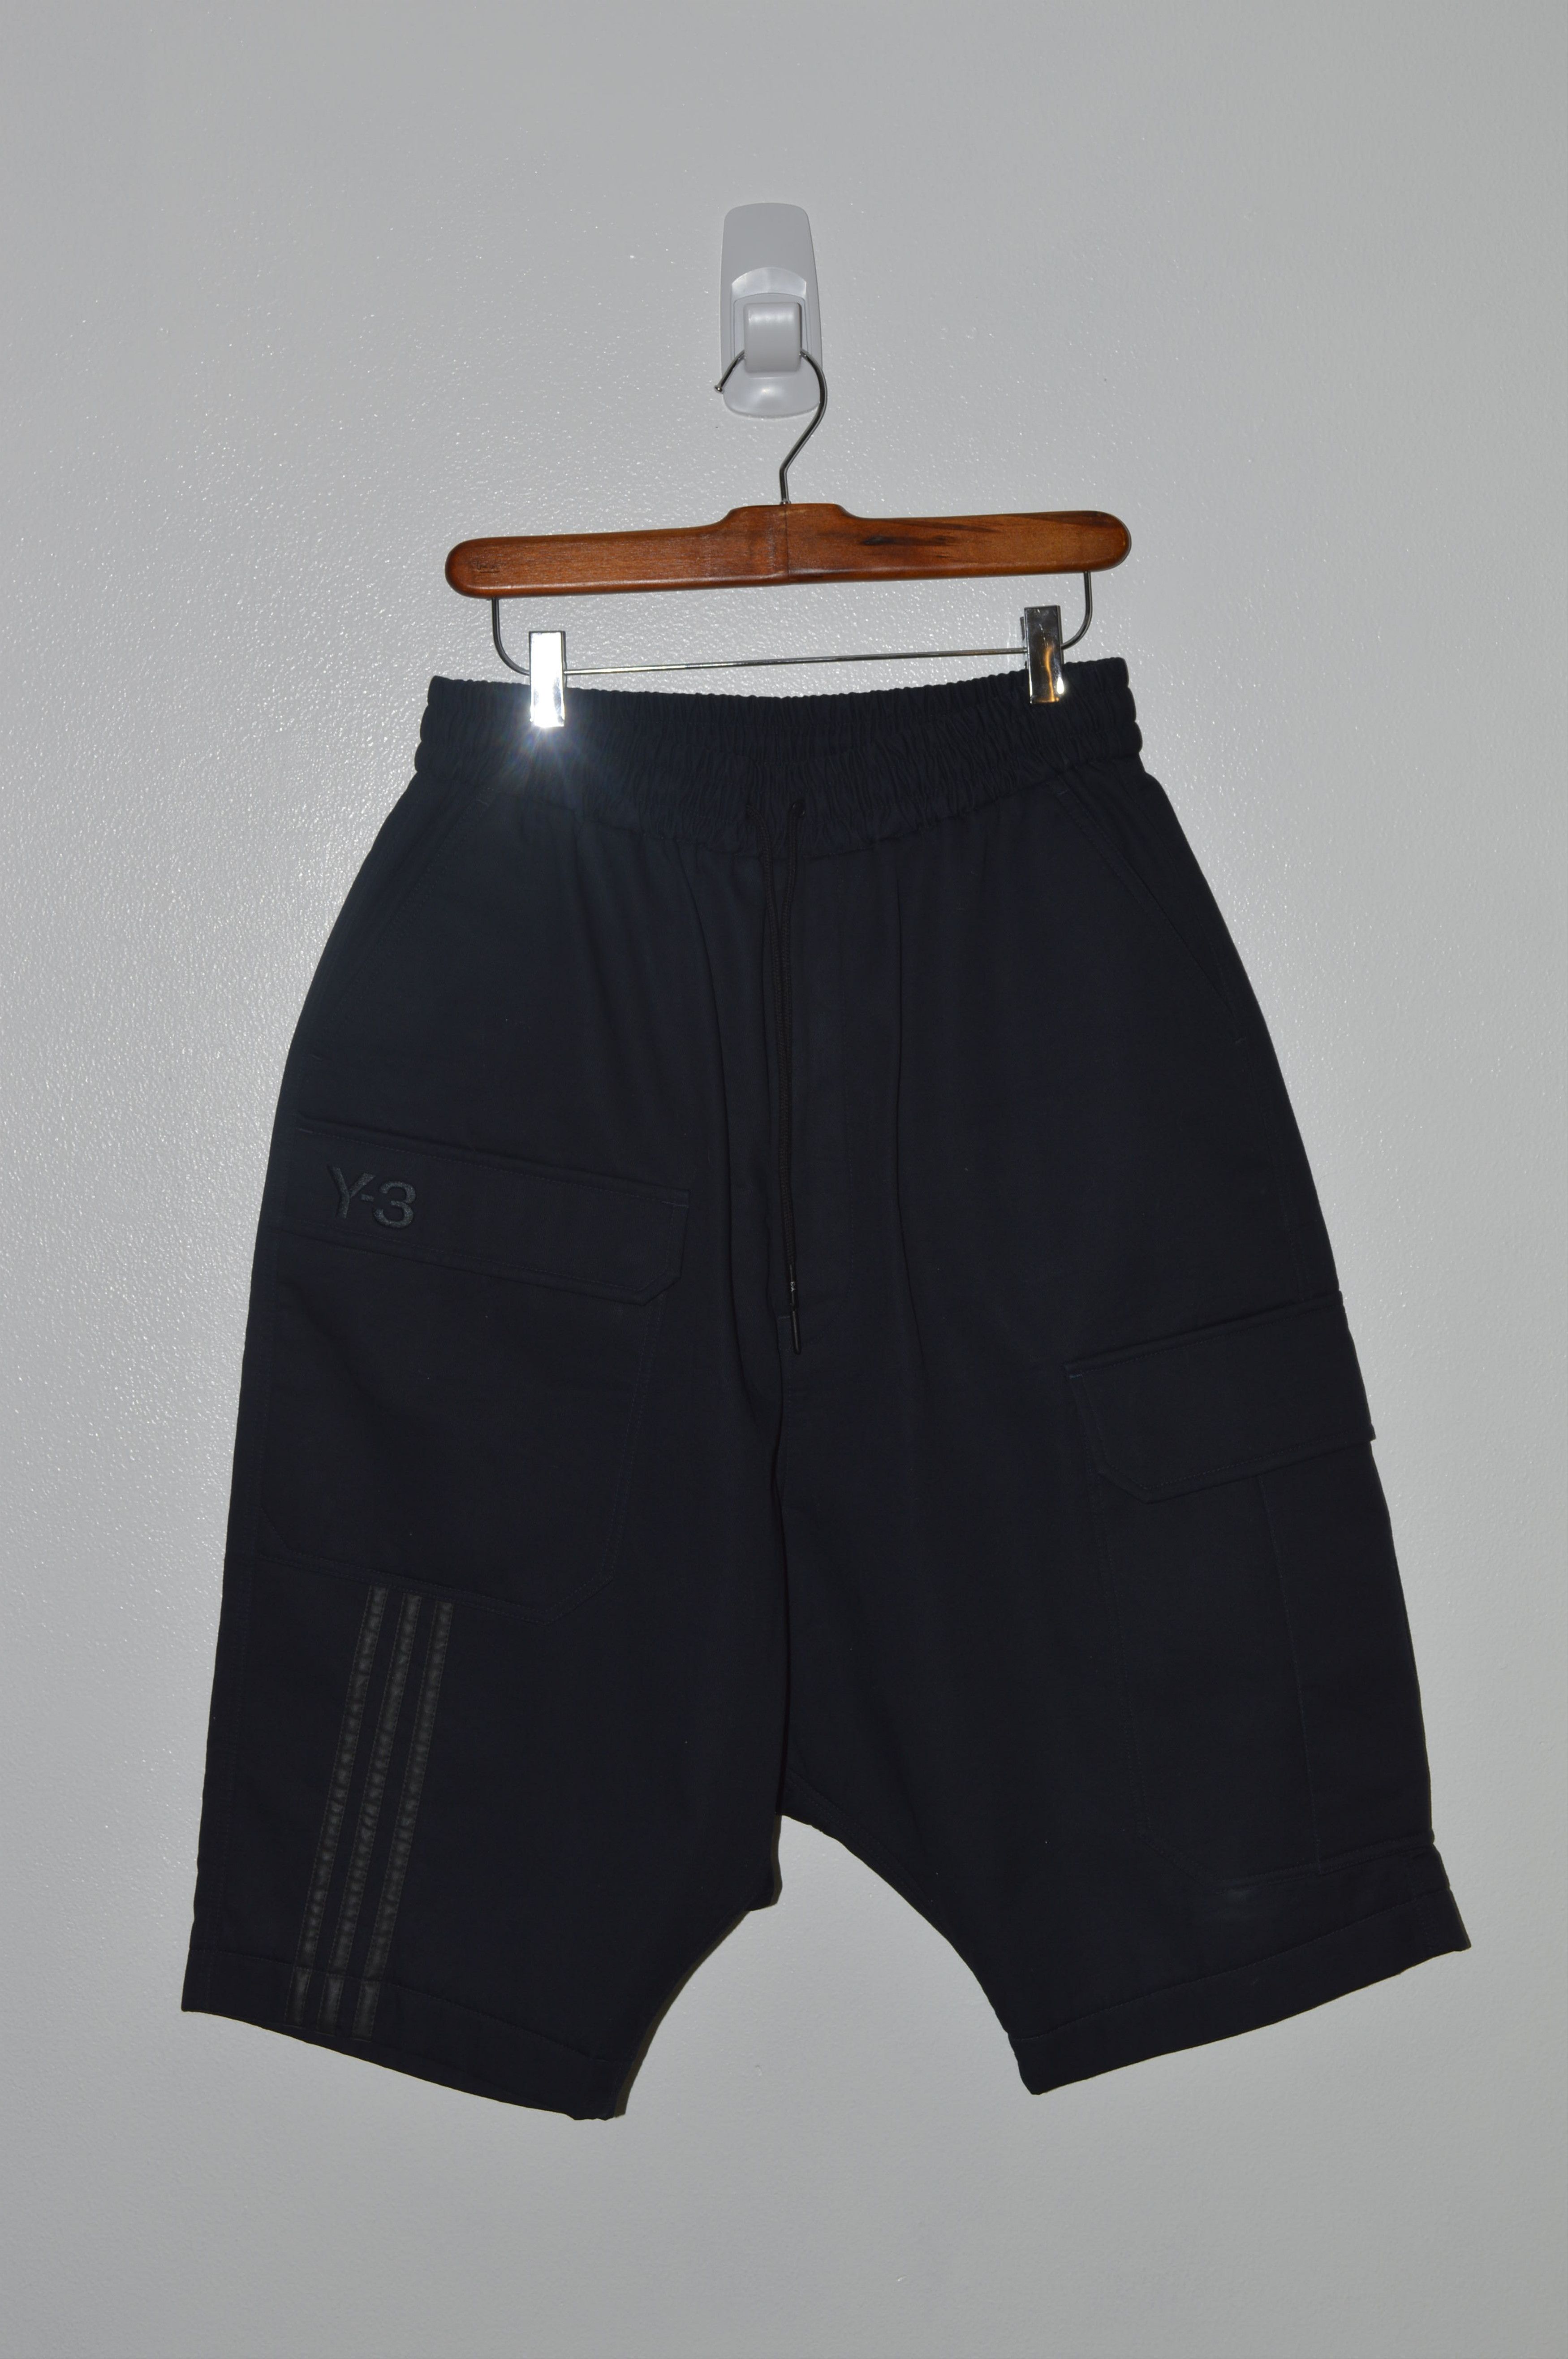 Y-3 (priced to sell)Drop Crotch Shorts Size US 30 / EU 46 - 9 Thumbnail